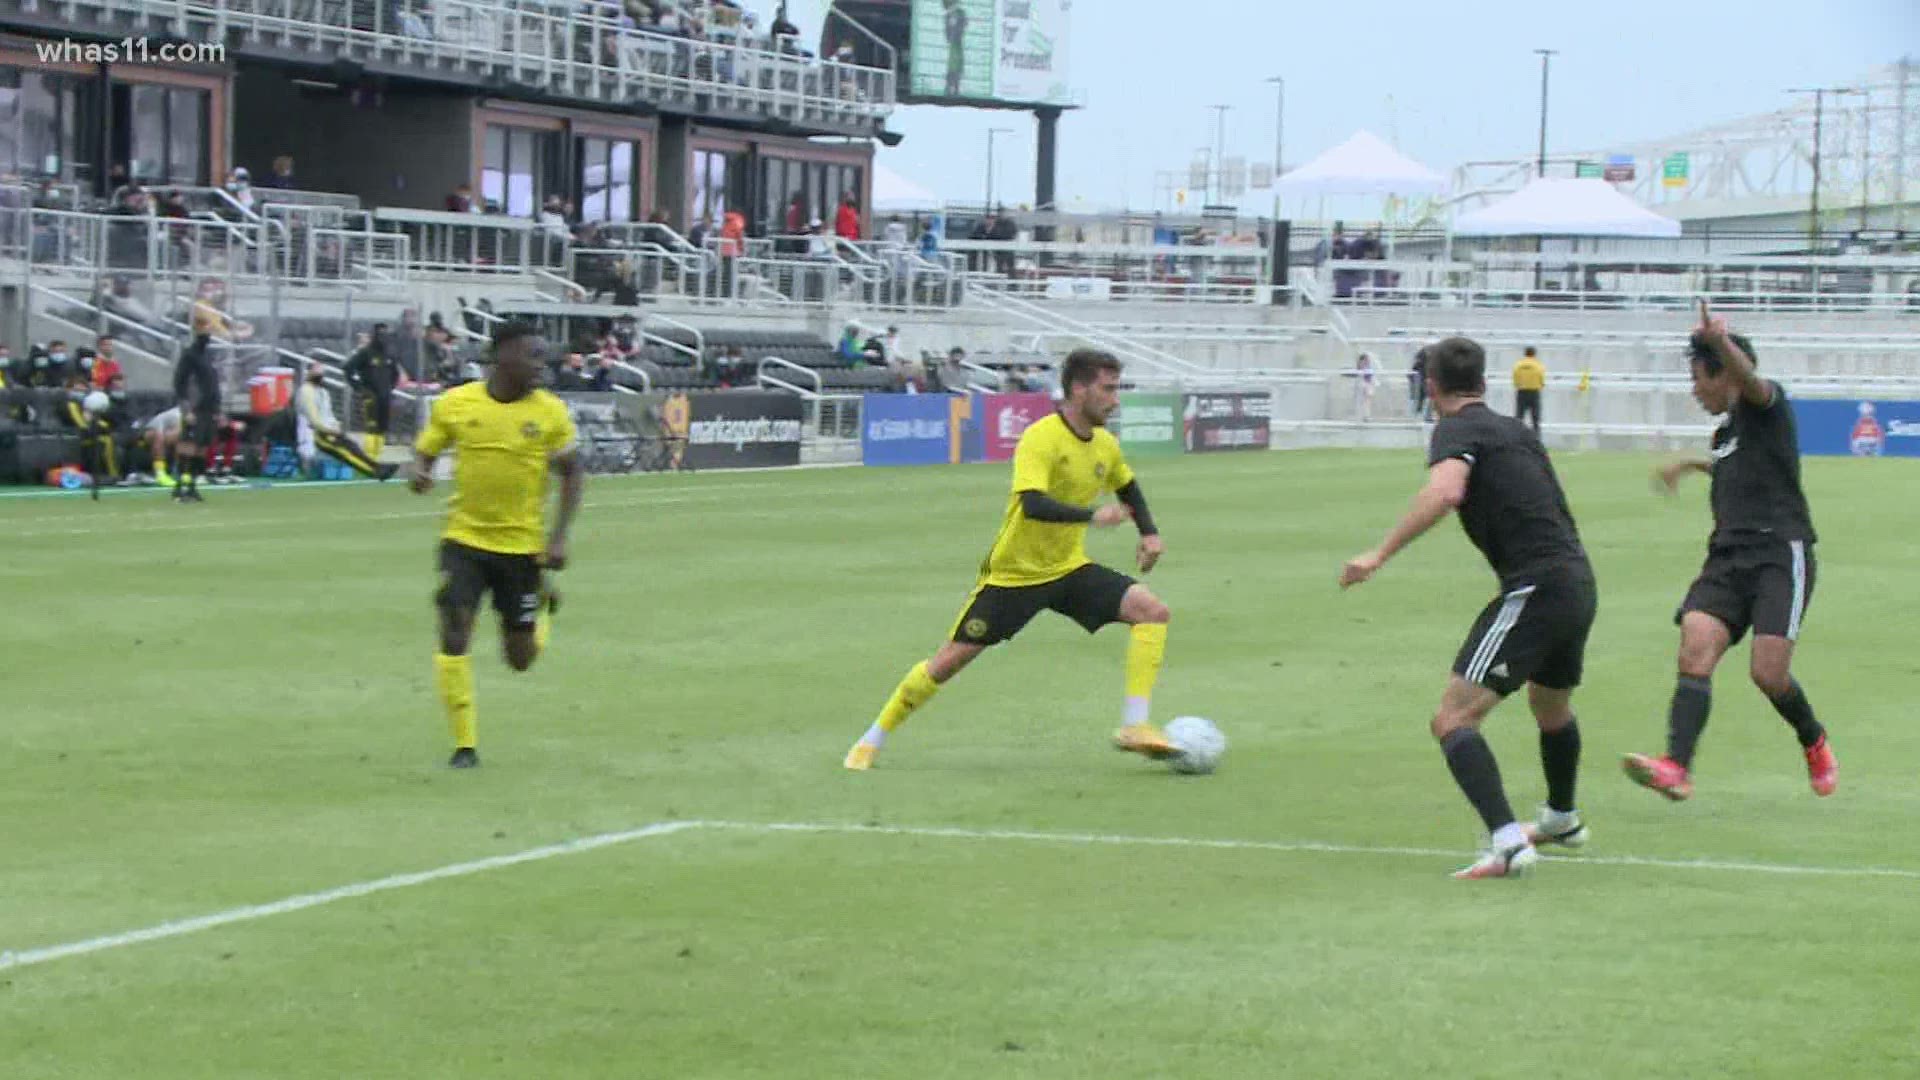 LouCity beats their rival the Pittsburgh Riverhounds 2-0 during preseason action.